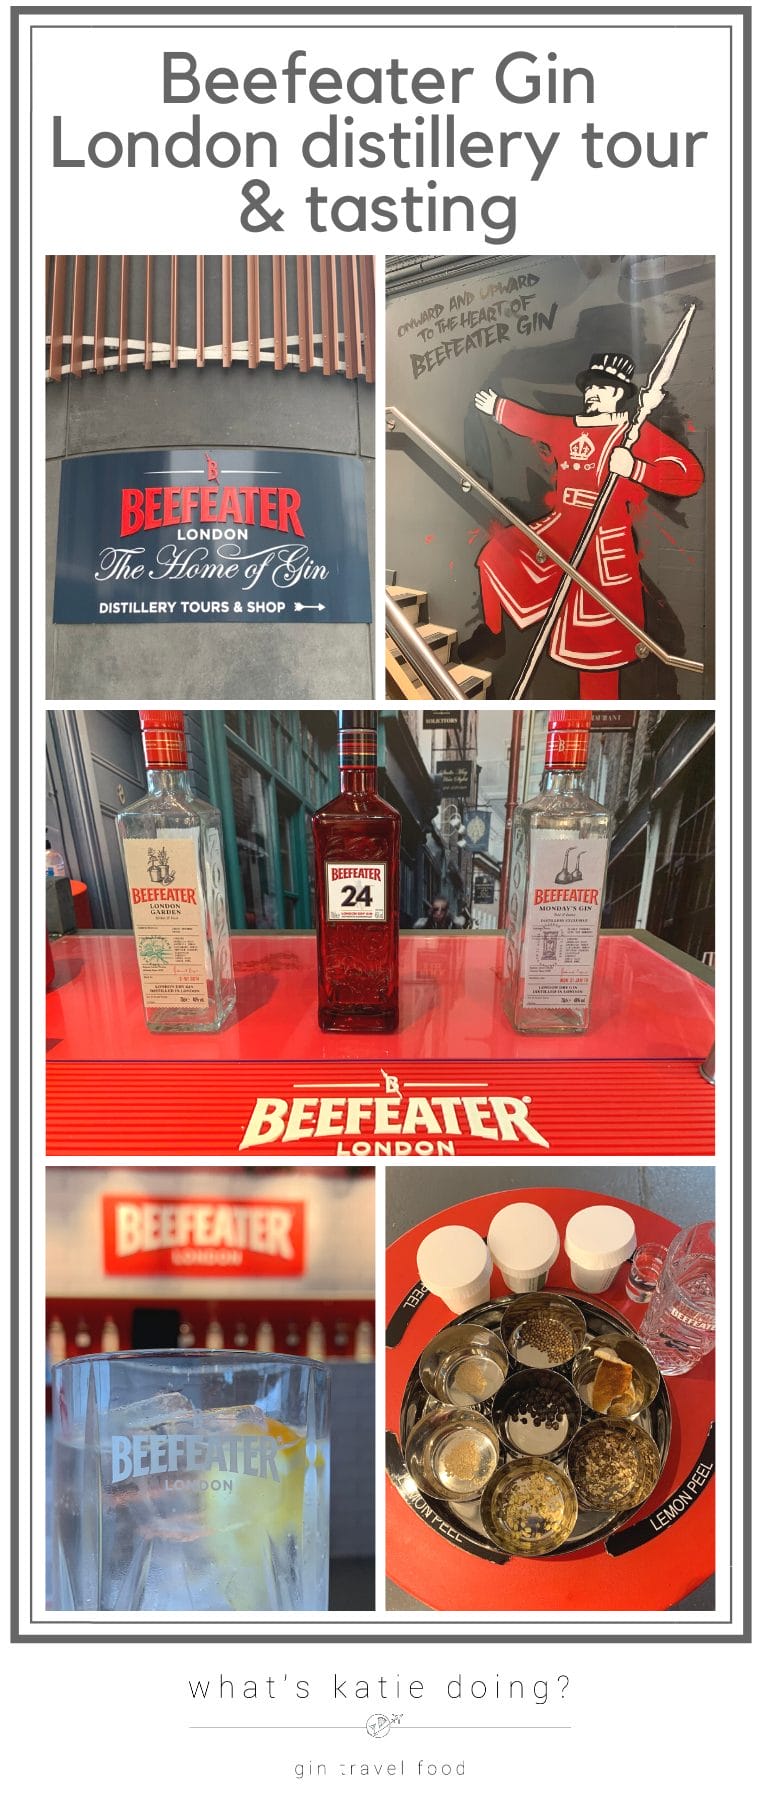 Beefeater Gin London distillery tour & Beefeater gin tasting